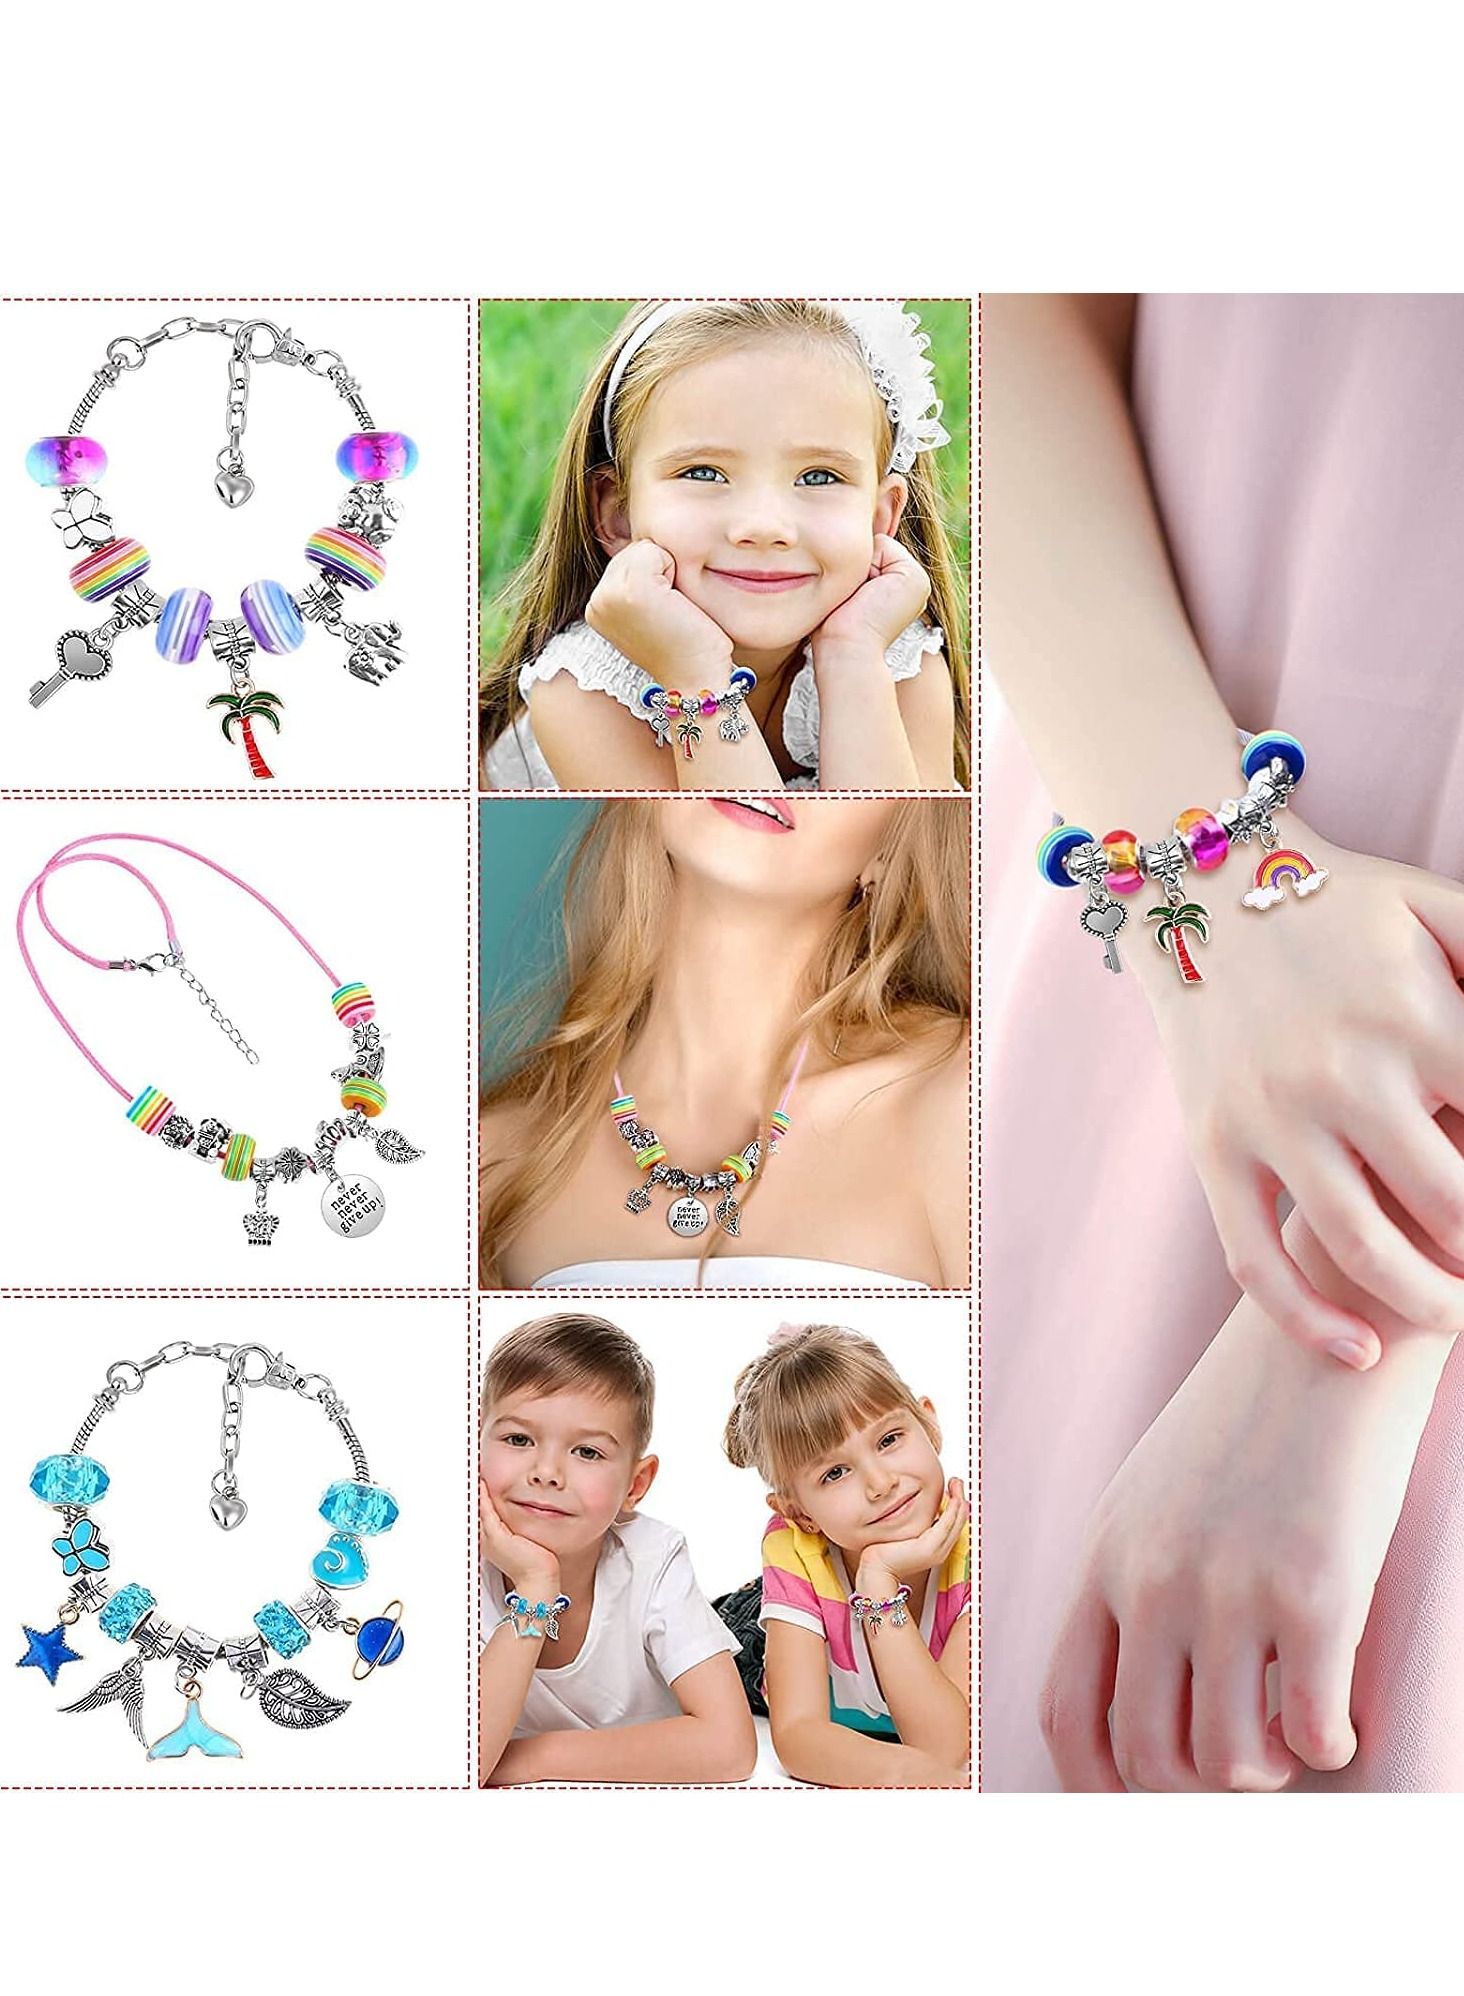 98 Pieces Charm Bracelet Making Kit, Including Jewelry Beads Snake Chain, DIY Gift Charm Beads for Girls, Jewelry Gift Set for Arts and Crafts 